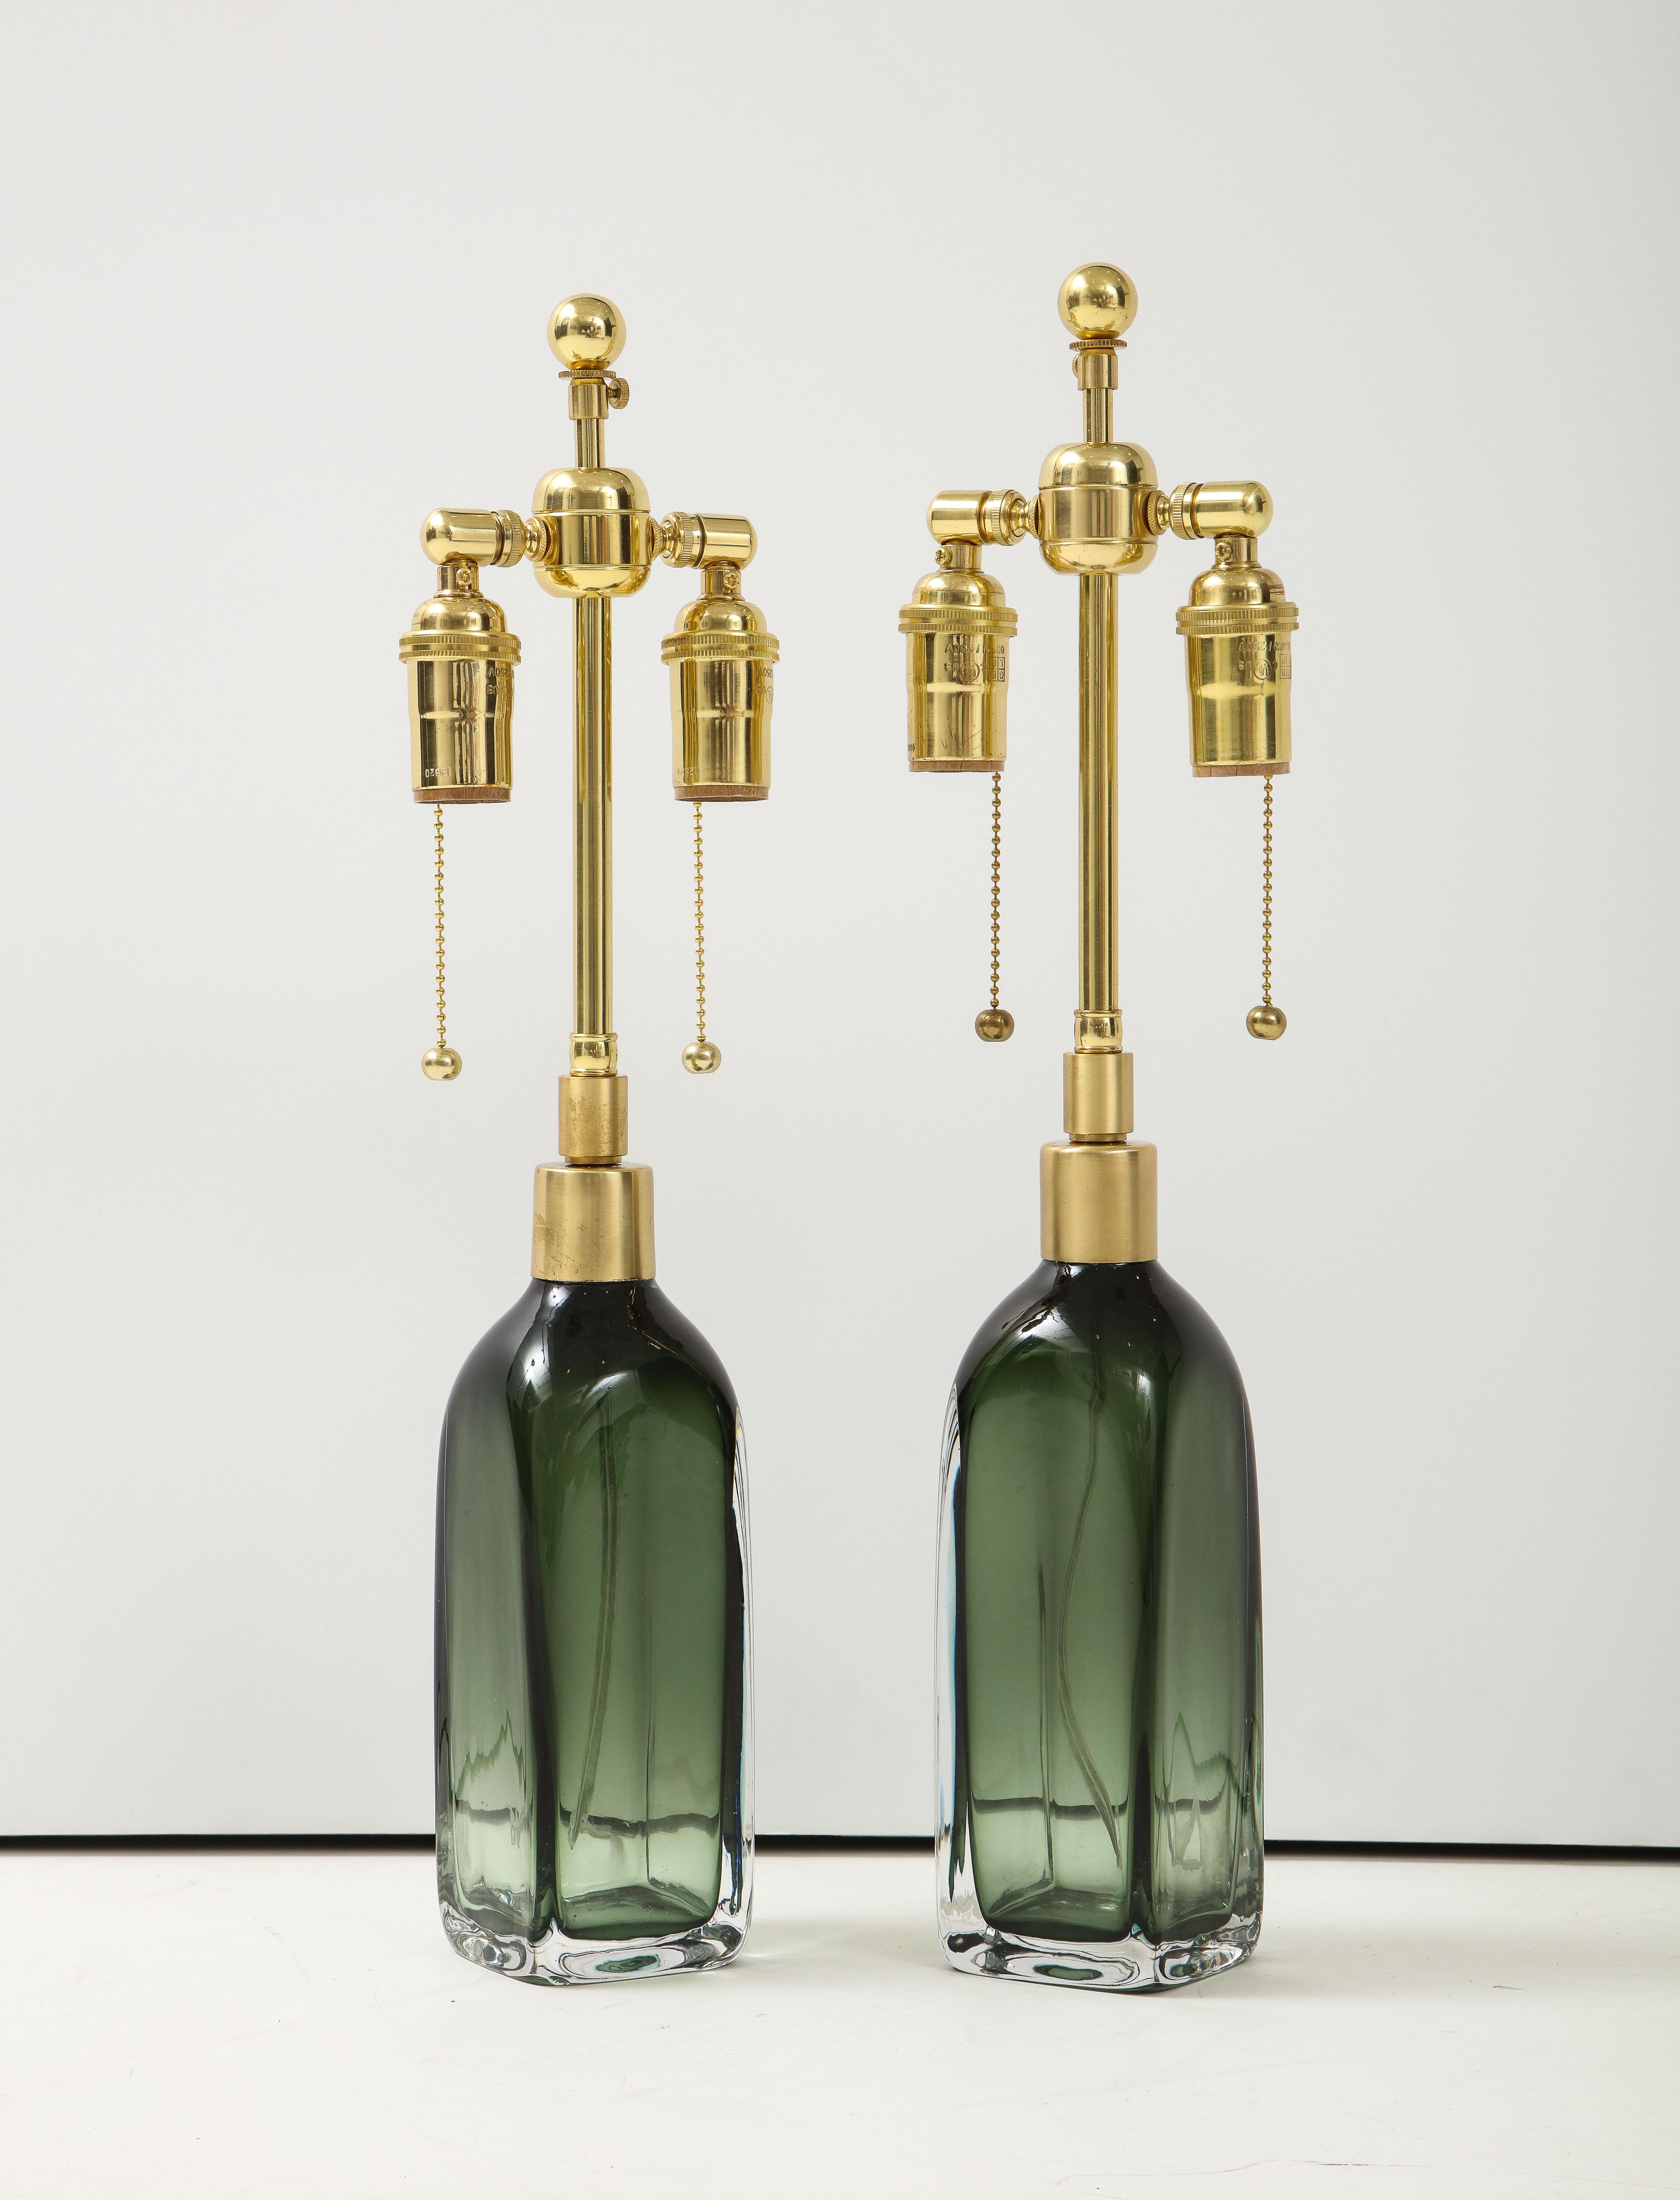 Pair of bottle green crystal glass lamps by Nils Landberg for Orrefors.
The lamps have been newly rewired with adjustable polished brass double 
clusters that take standard light bulbs.
One of the glass bodies is slight taller than the other but